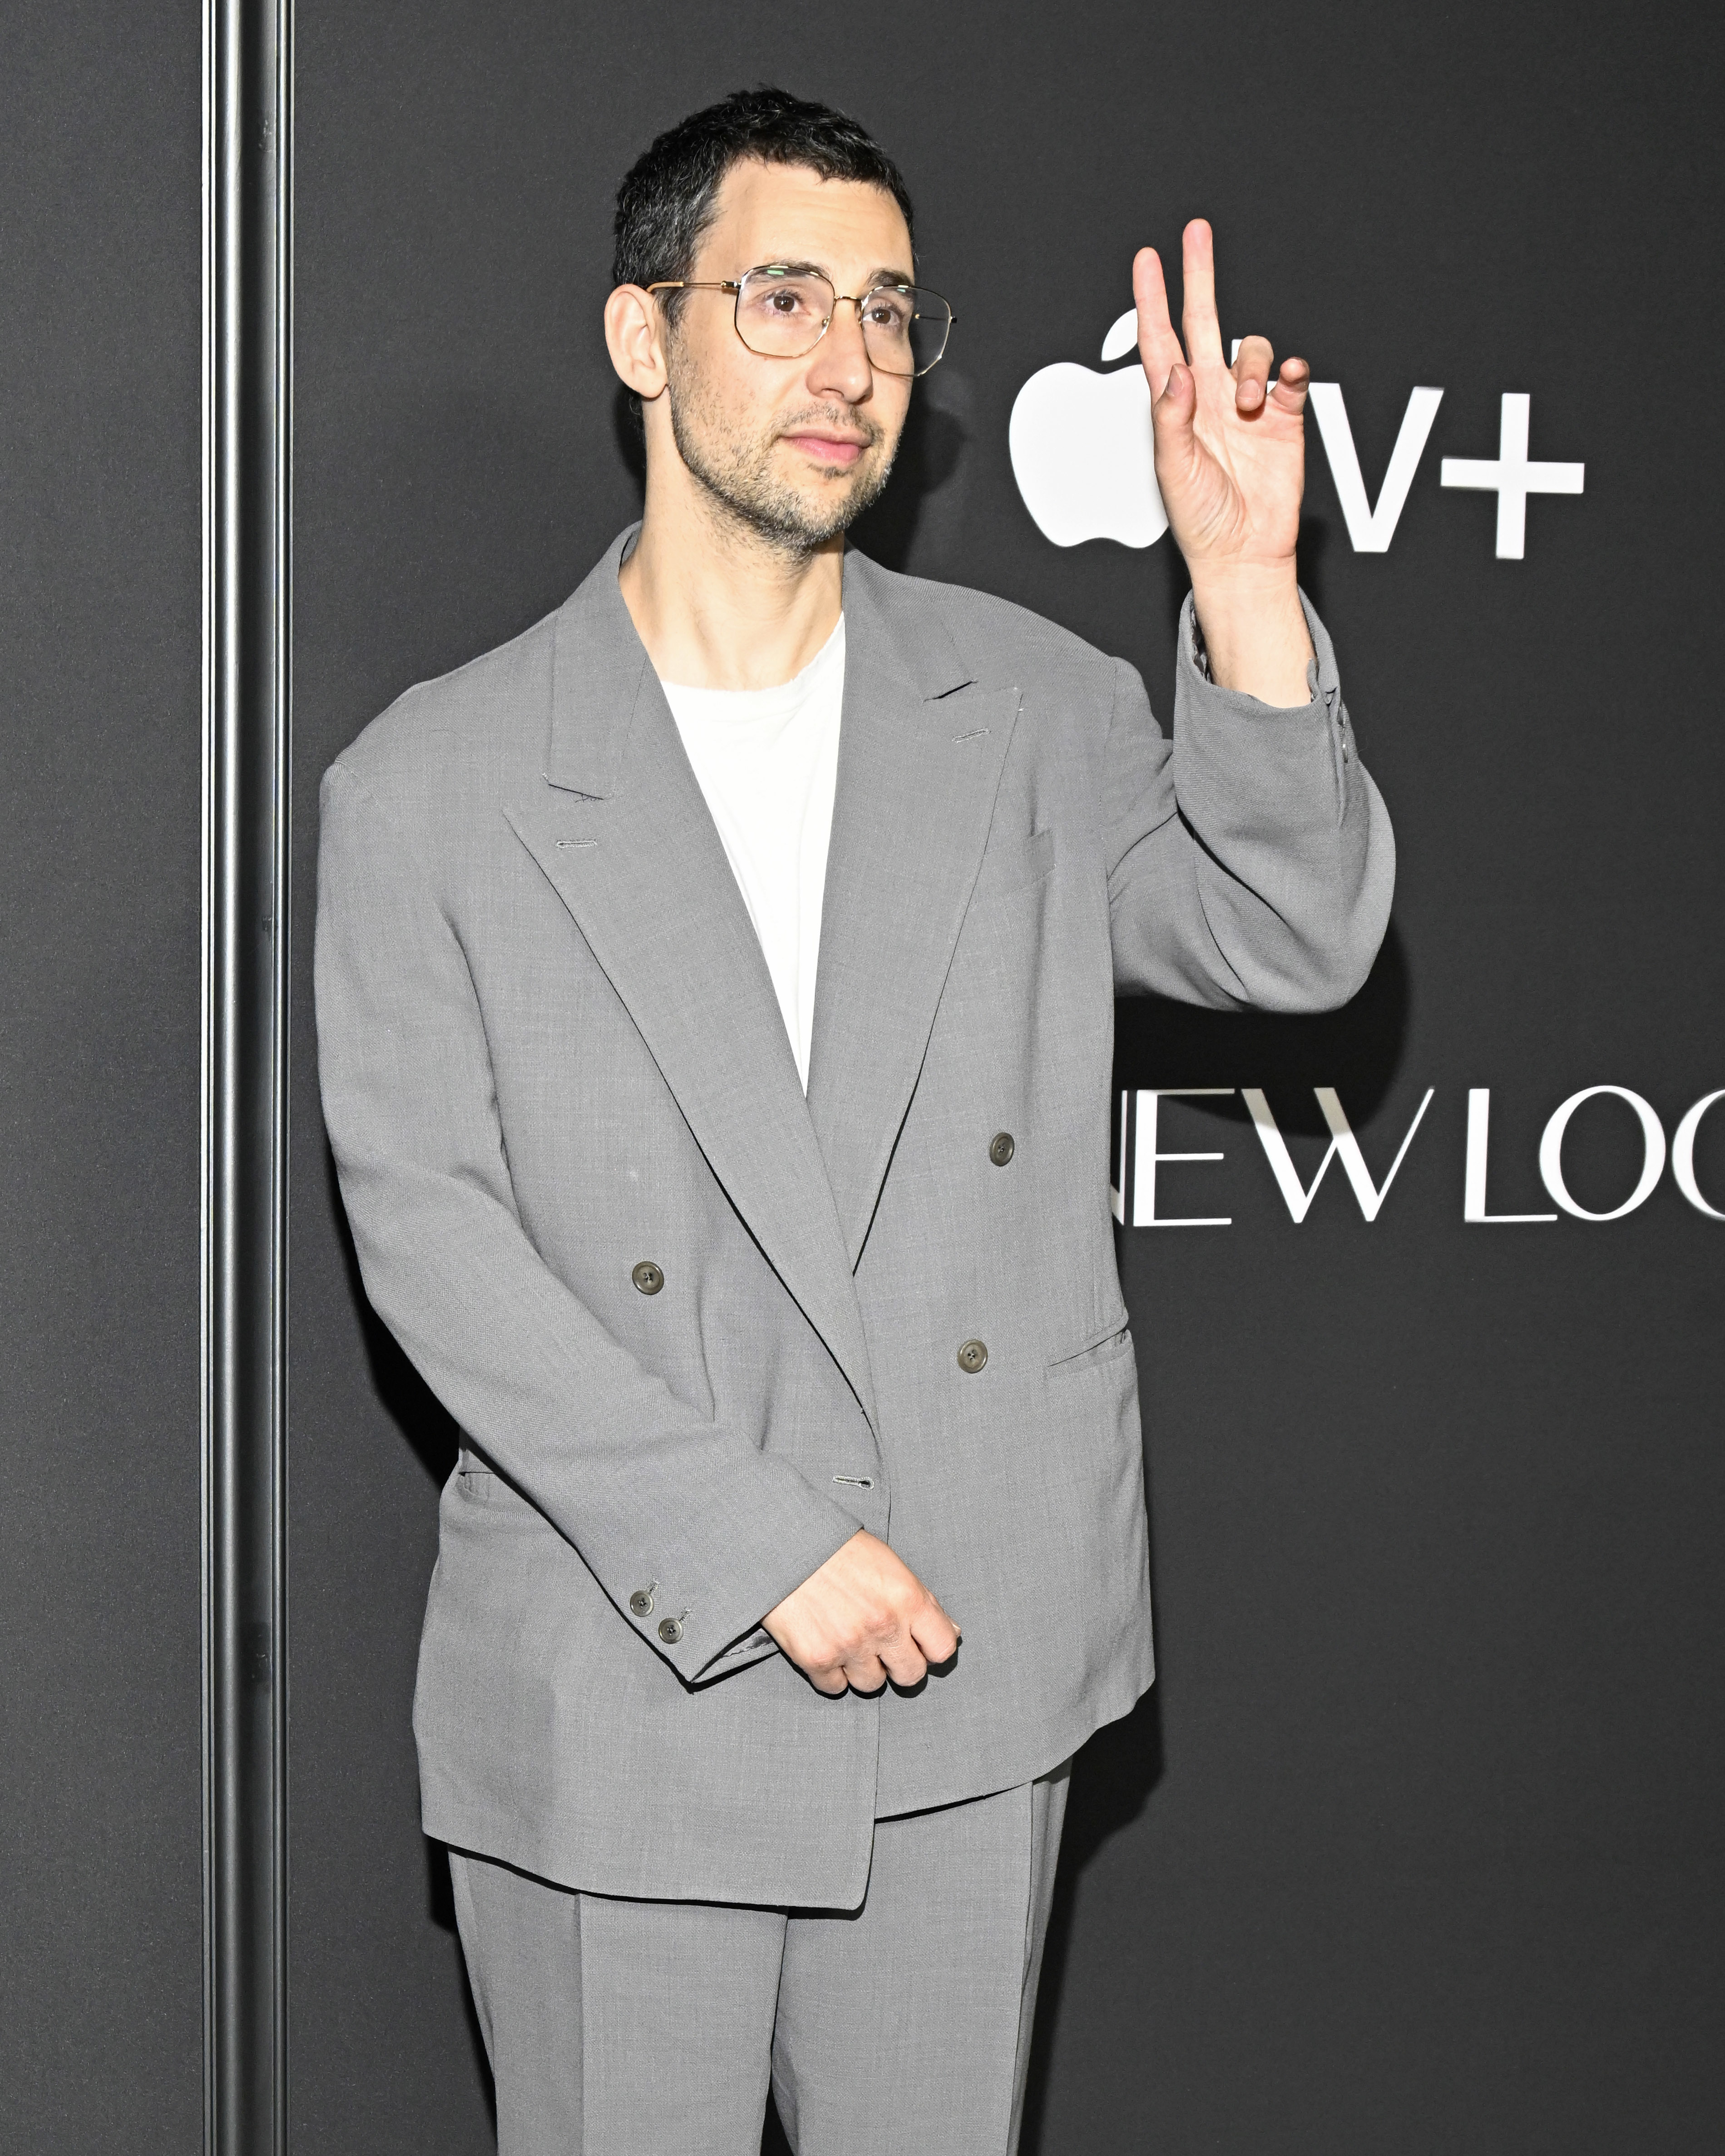 jack throwing up a peace sign while at an event dressed in a suit